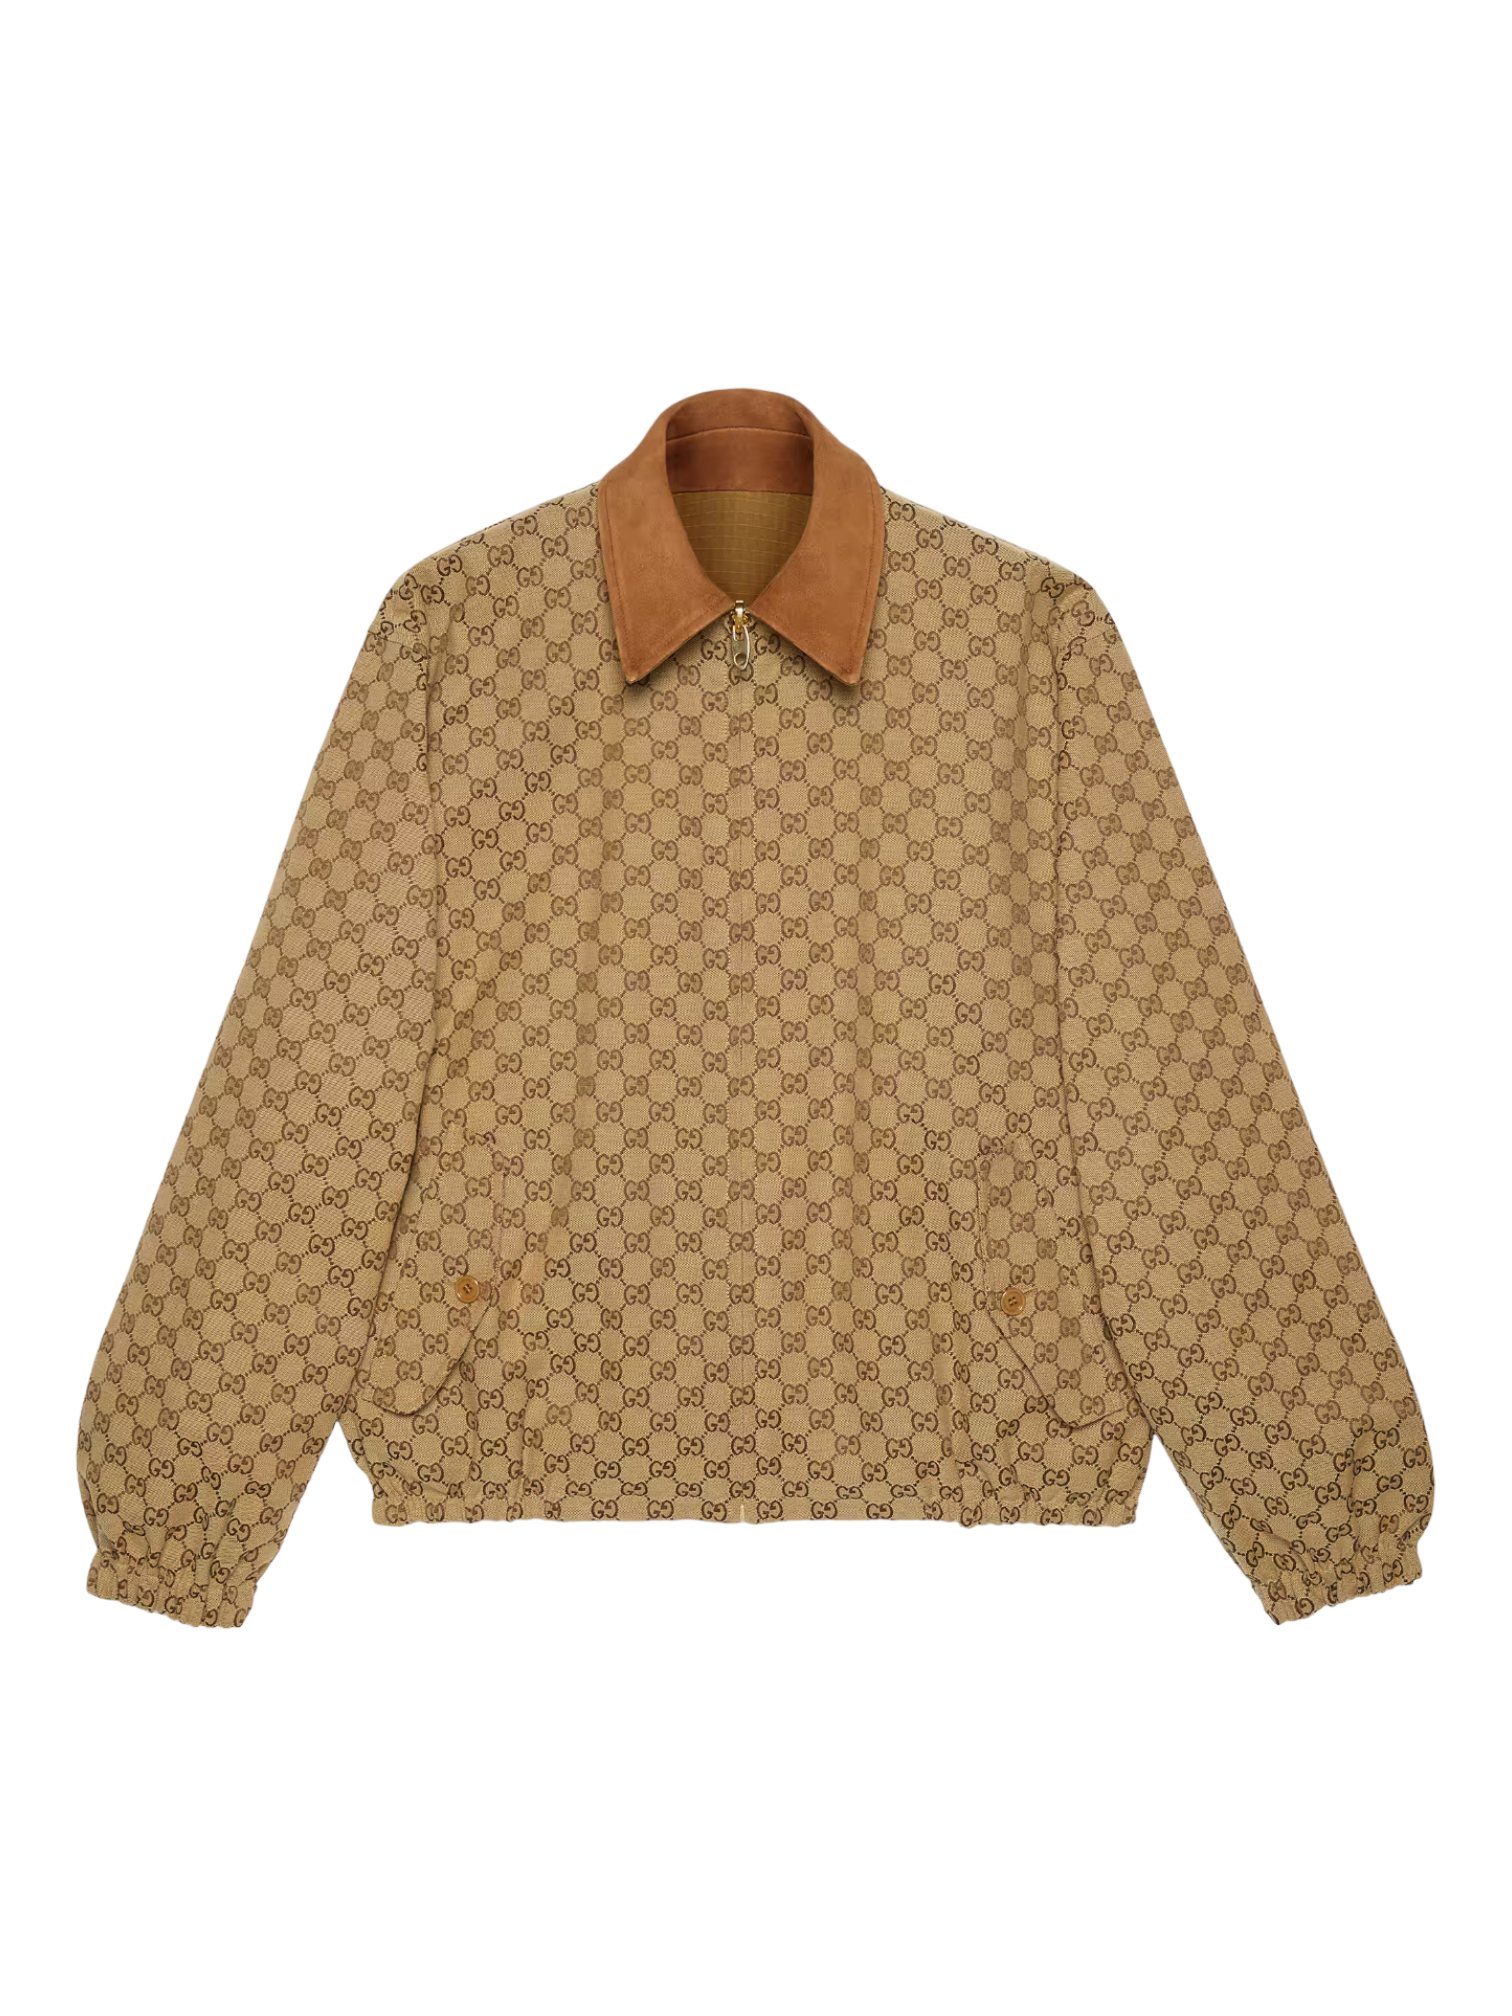 Gucci Brown Reversible GG Monogram Bomber Jacket Large — Genuine Design Luxury Consignment Calgary, Canada New & Pre-Owned Authentic Clothing, Shoes, Accessories.